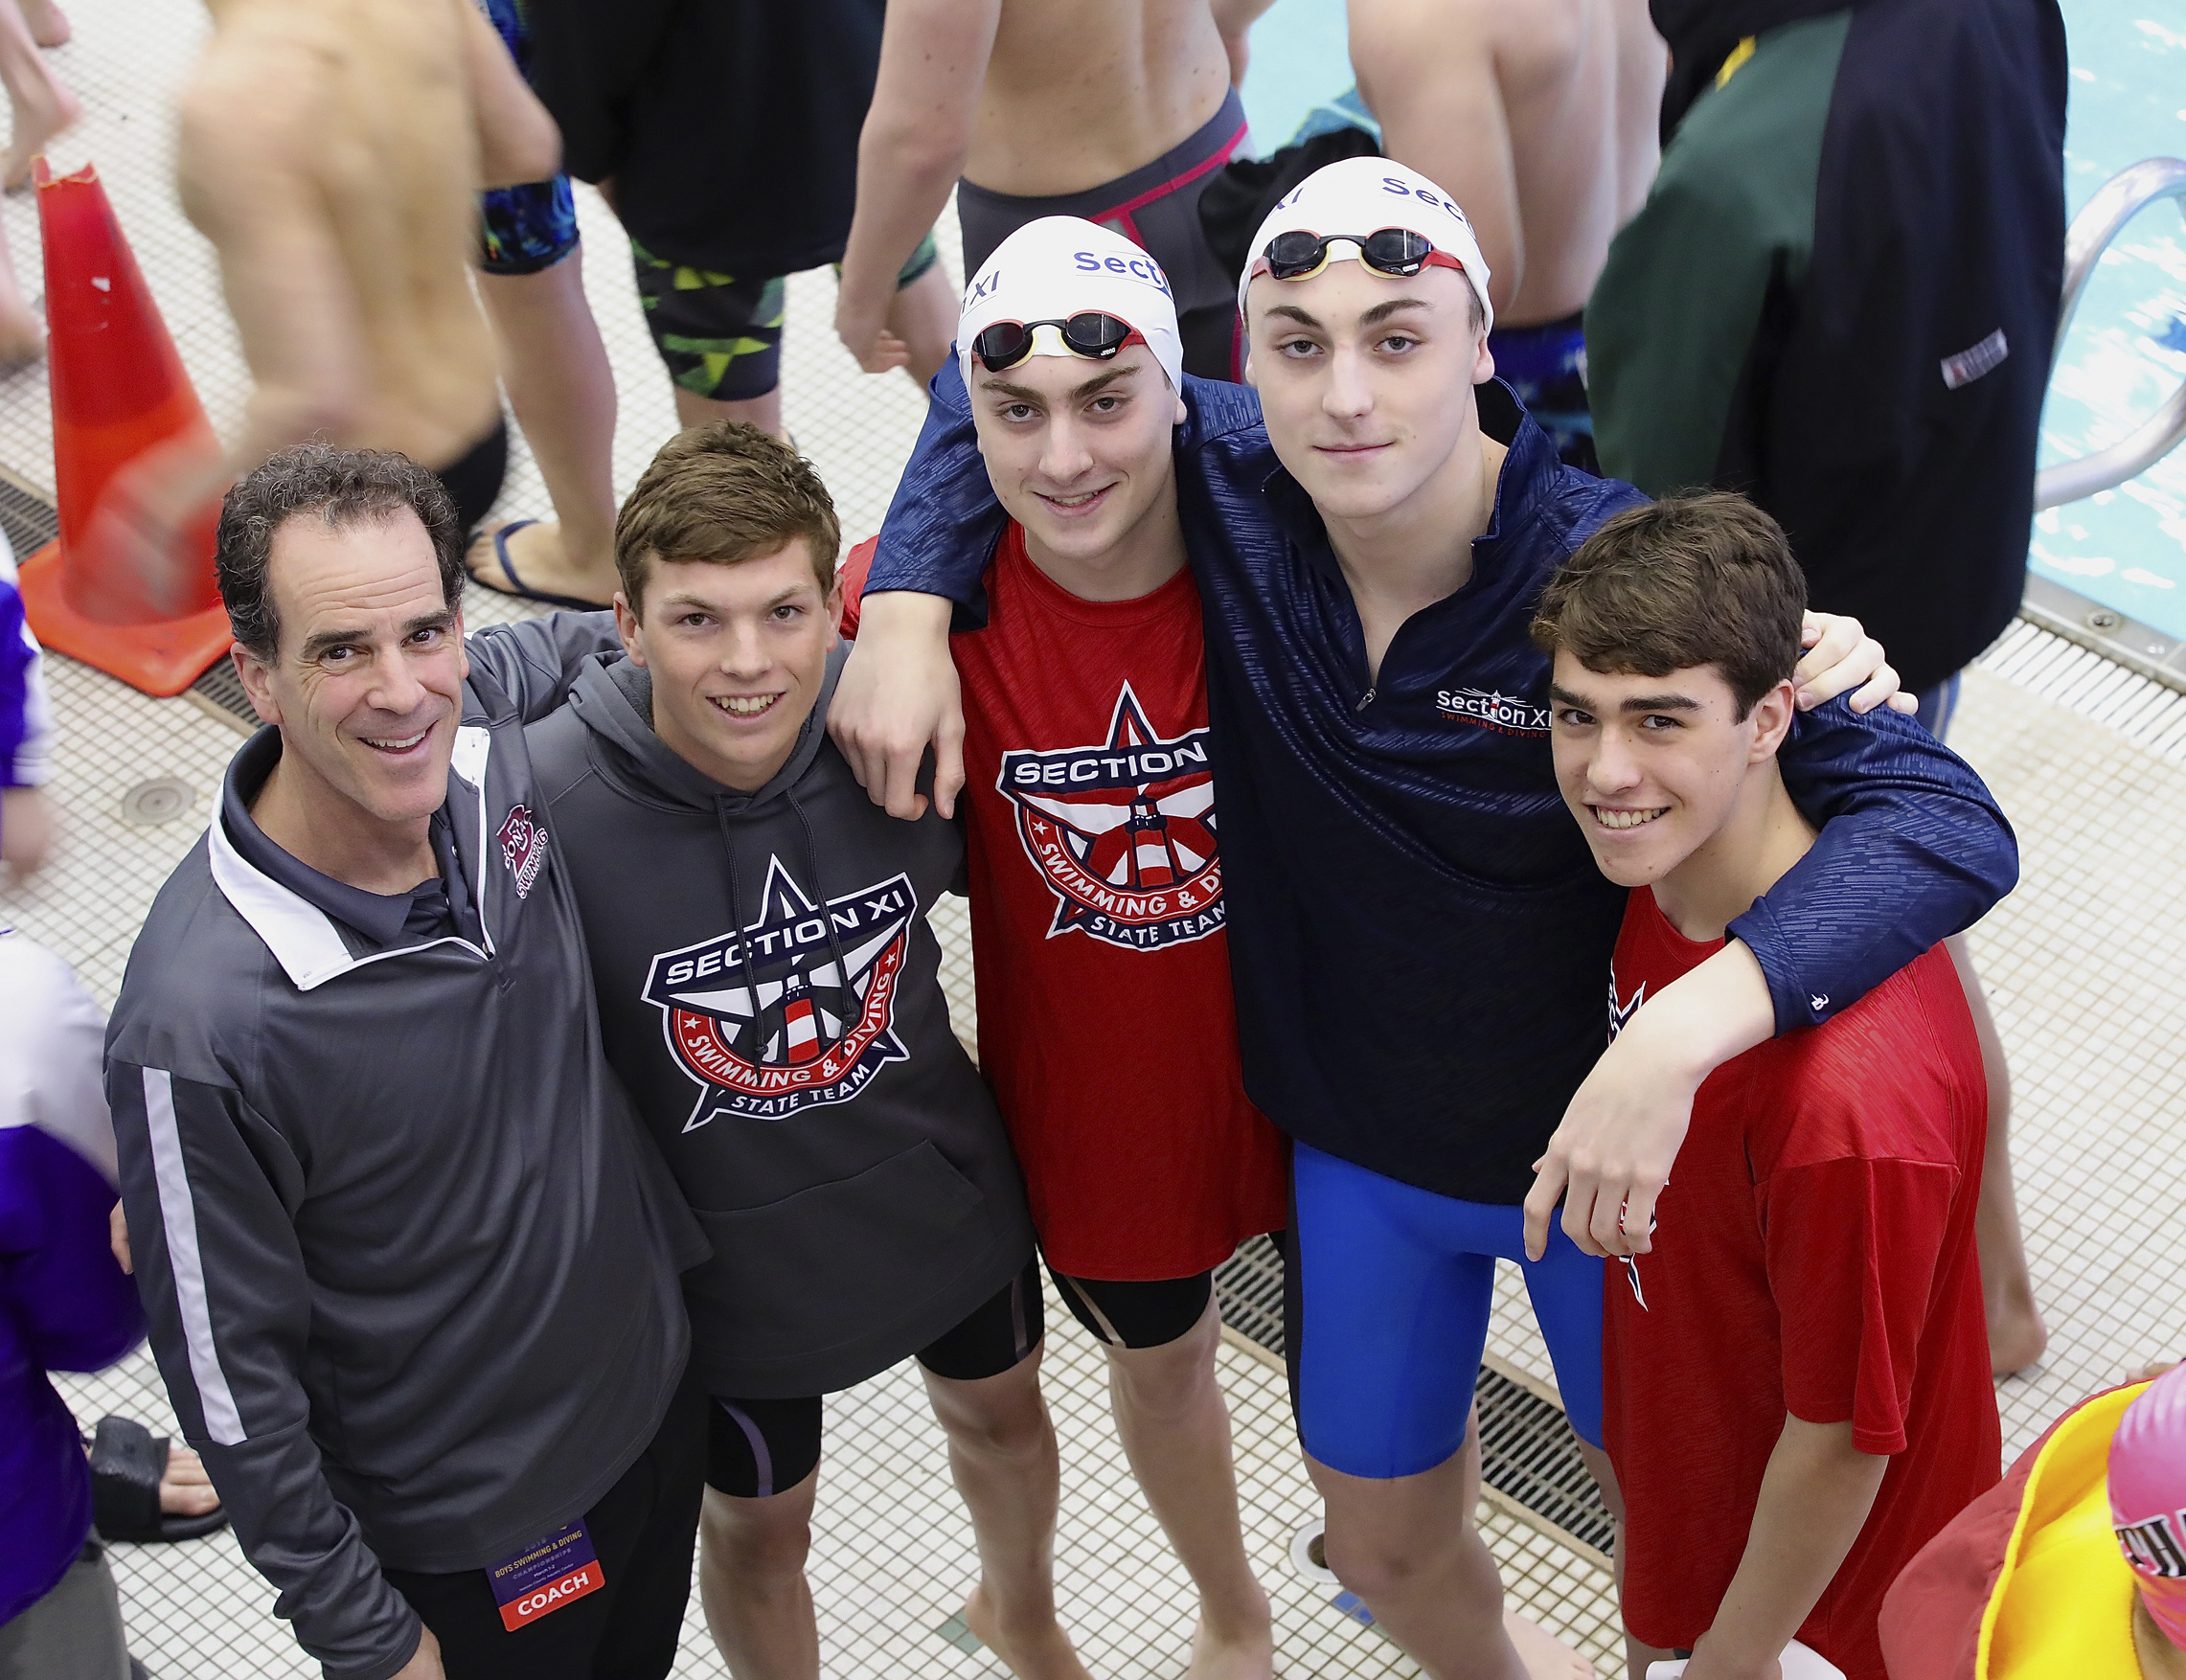 Banner Season Ends On High Note 
March 7 -- The East Hampton/Pierson/Bridgehampton boys swimming team had its best season in 2018-2019, going undefeated to win the League II title, winning the League II Championship meet, placing second in the county meet and sending six to the state meet, all program firsts. East Hampton boys swimming head coach Craig Brierley, far left, with Pierson's Ryan Duryea, East Hampton's Owen McCormac, Ethan McCormac and Aidan Forst.